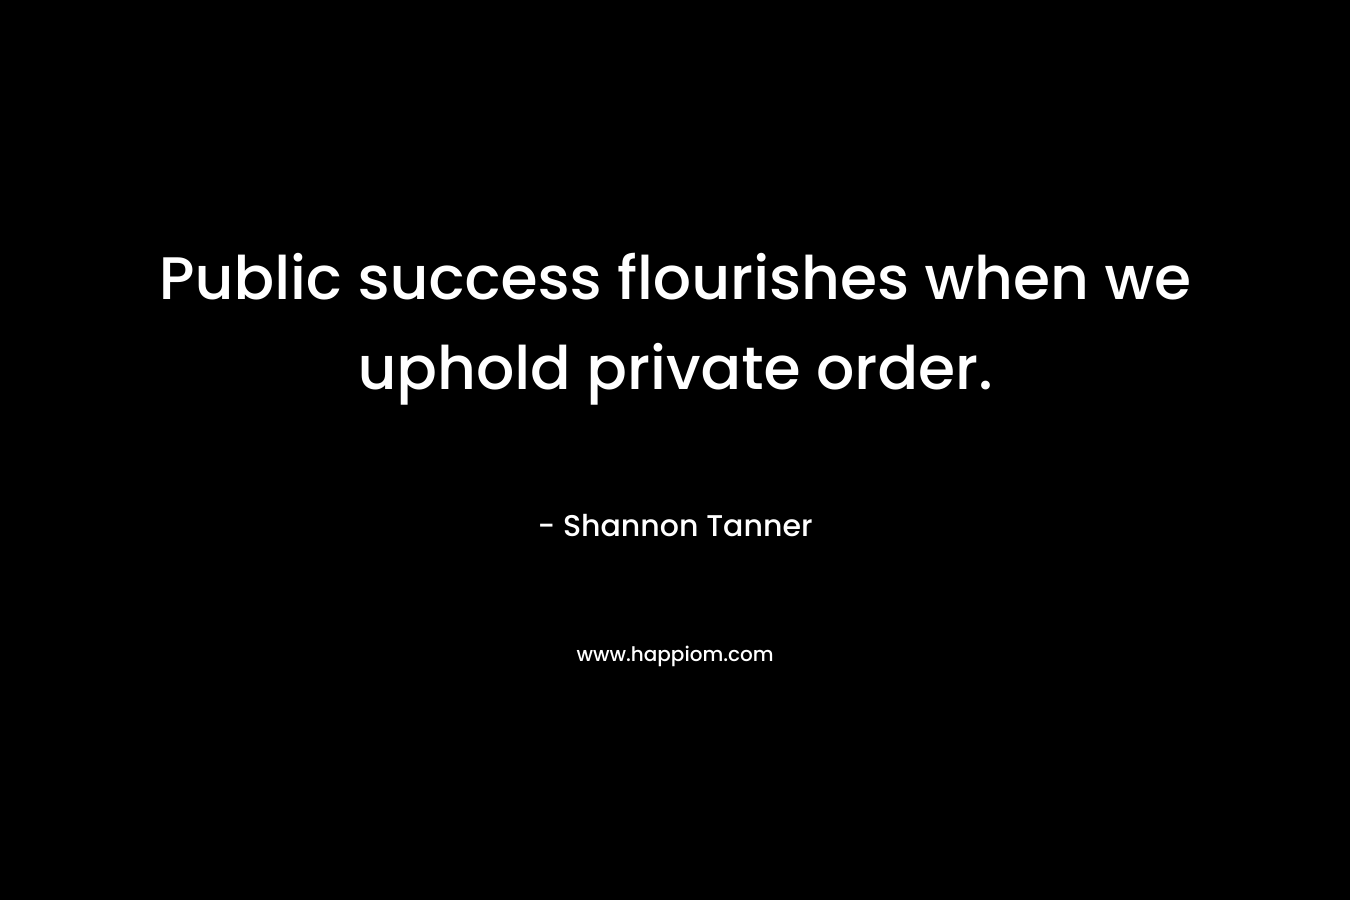 Public success flourishes when we uphold private order. – Shannon Tanner